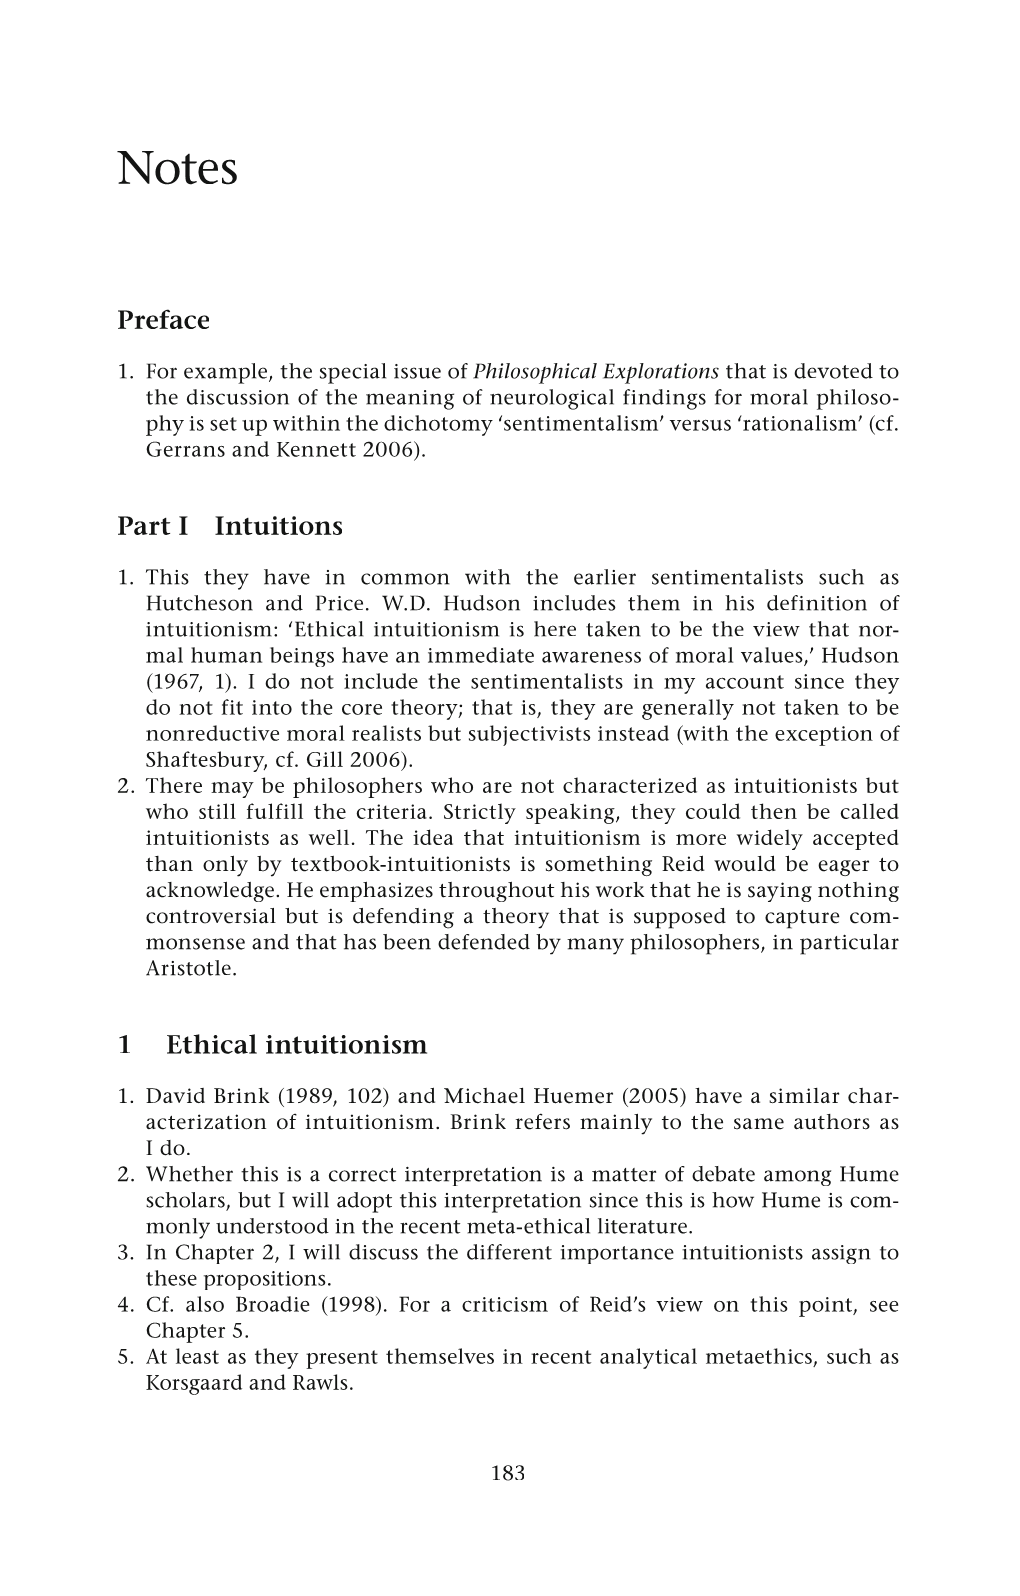 Preface Part I Intuitions 1 Ethical Intuitionism